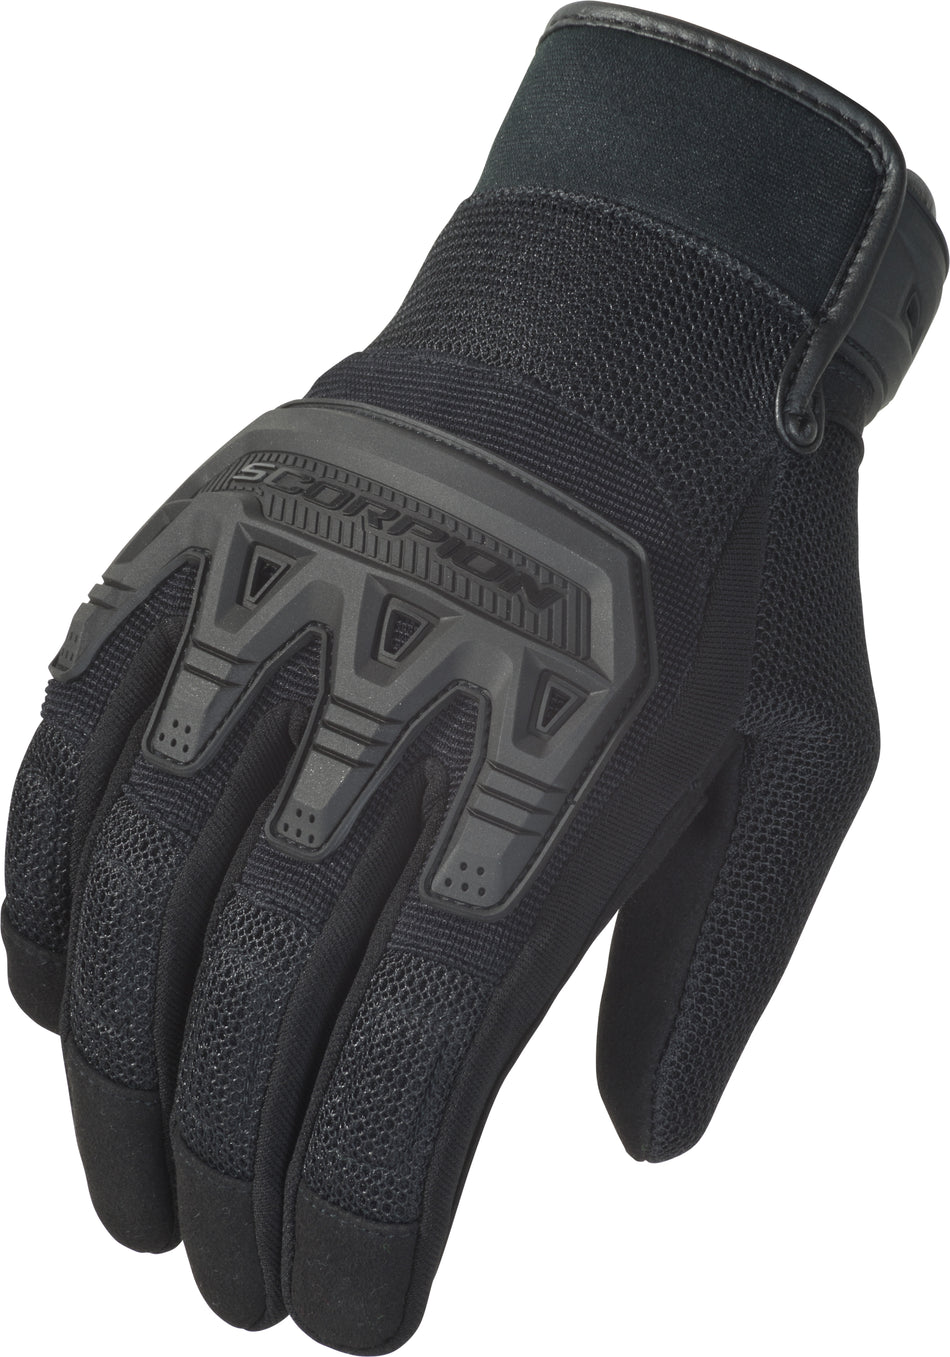 SCORPION EXO Covert Tactical Gloves Black Md G32-034